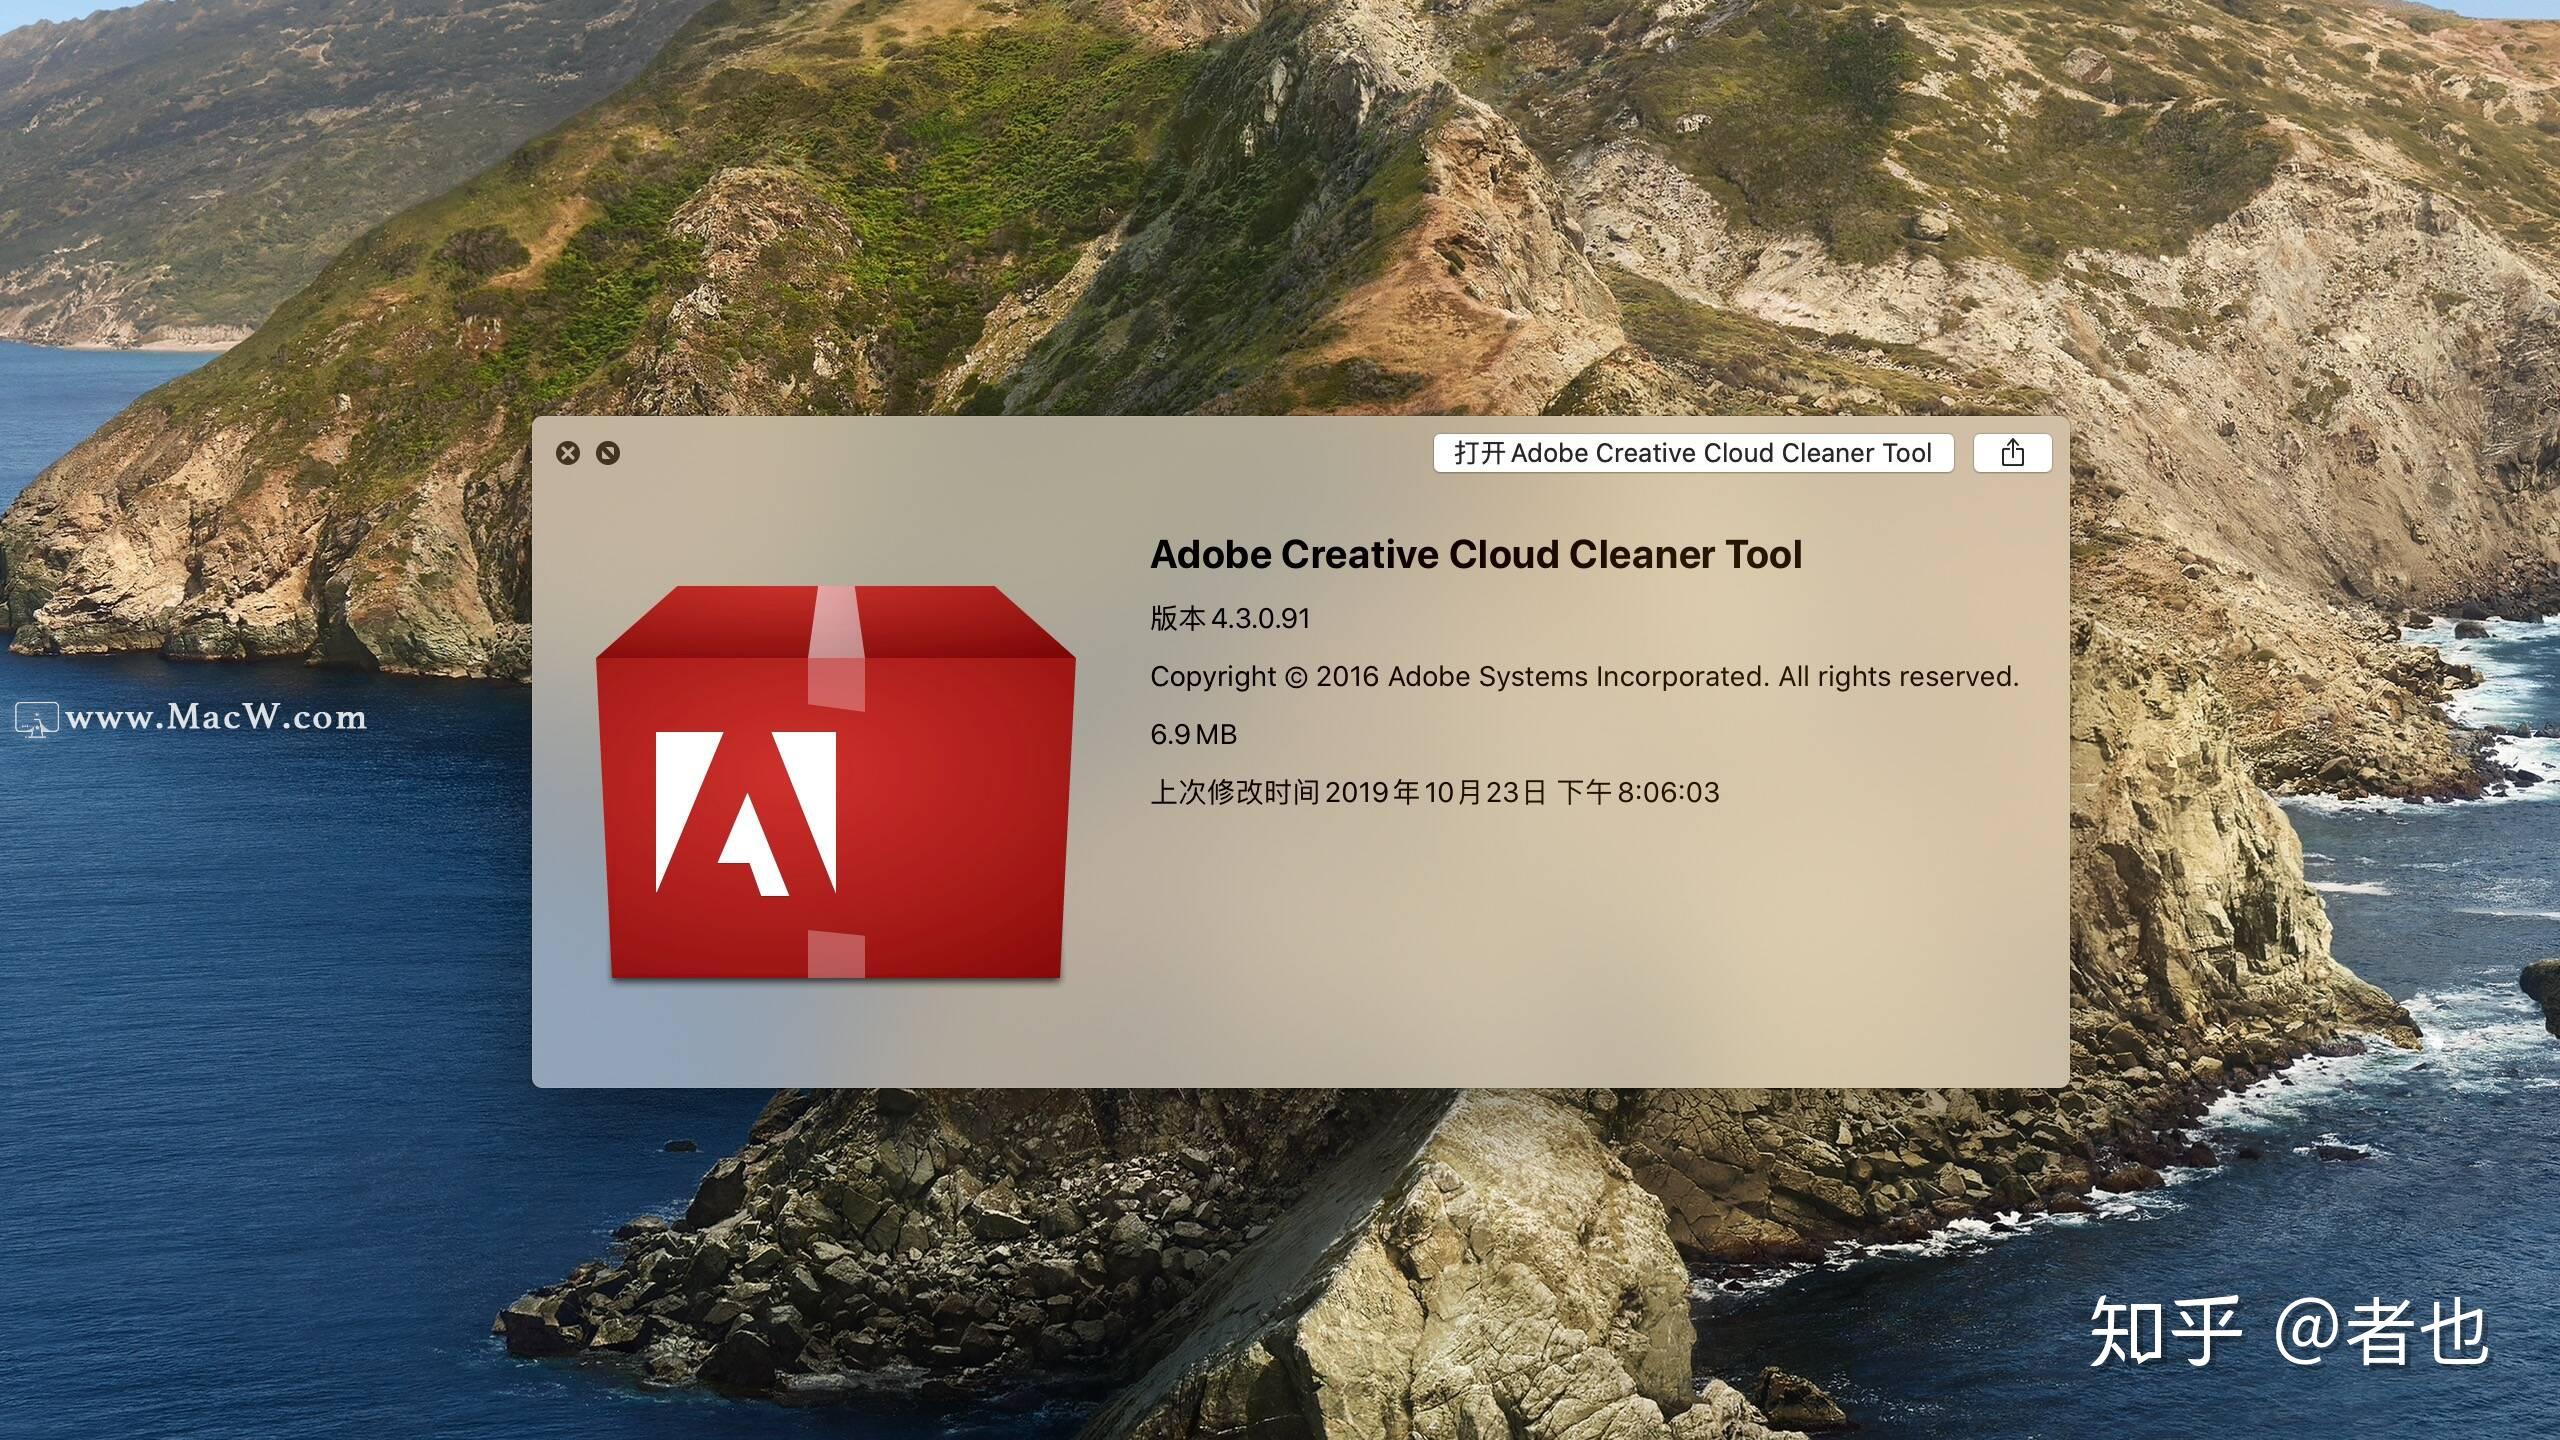 Adobe Creative Cloud Cleaner Tool 4.3.0.395 download the last version for ios